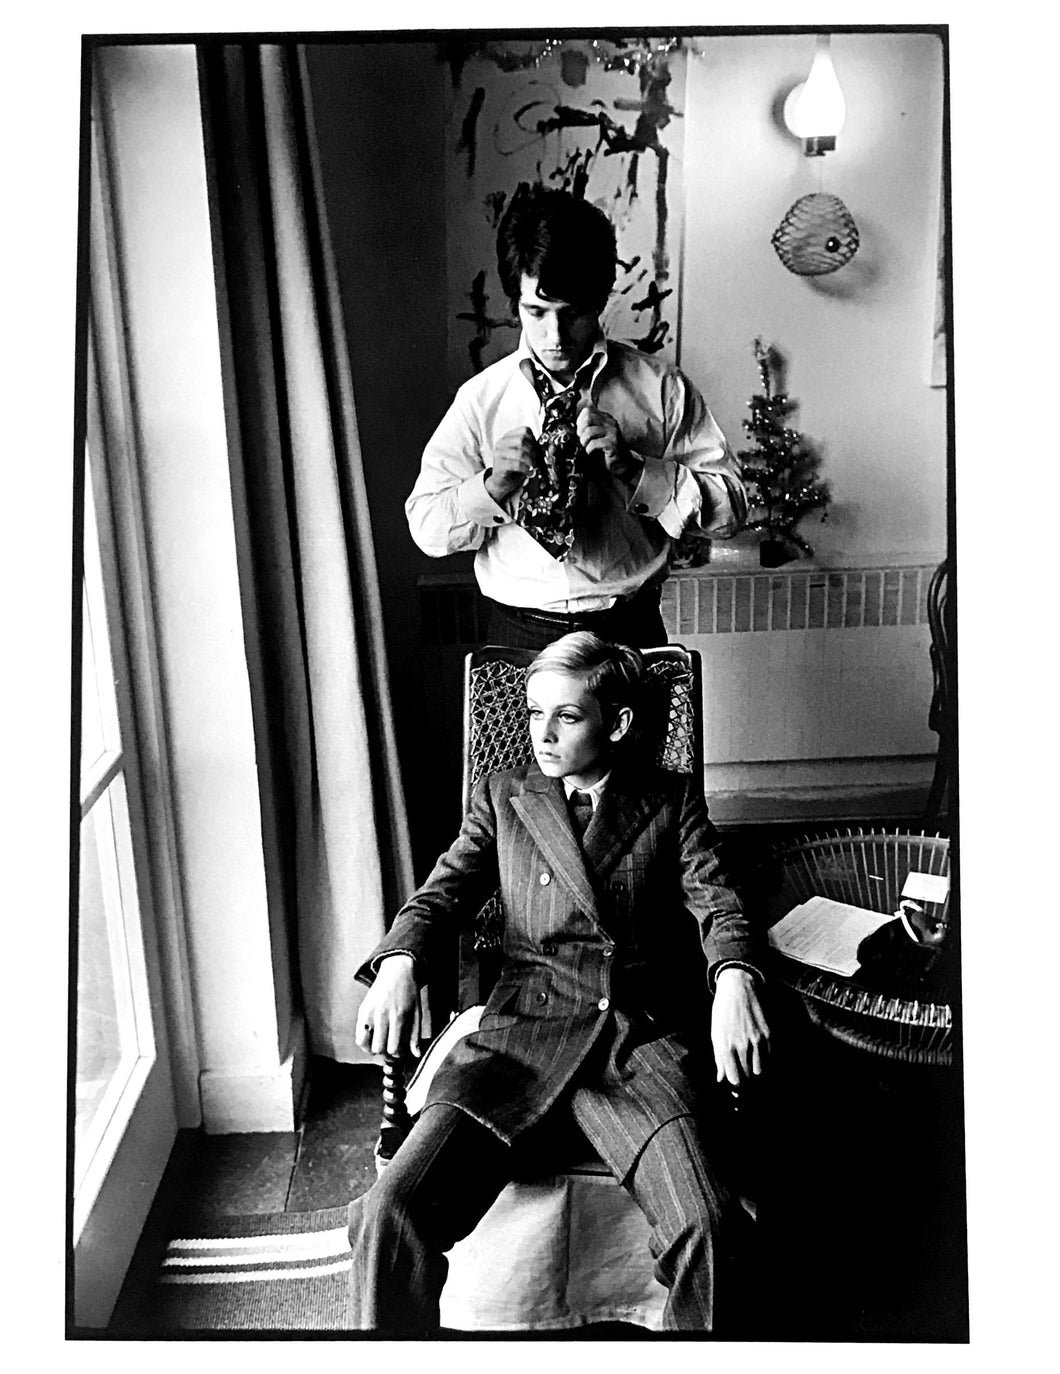 Twiggy, London, England, Black and White Photography 1960s of Pop Star and Her Agent by Burt Glinn